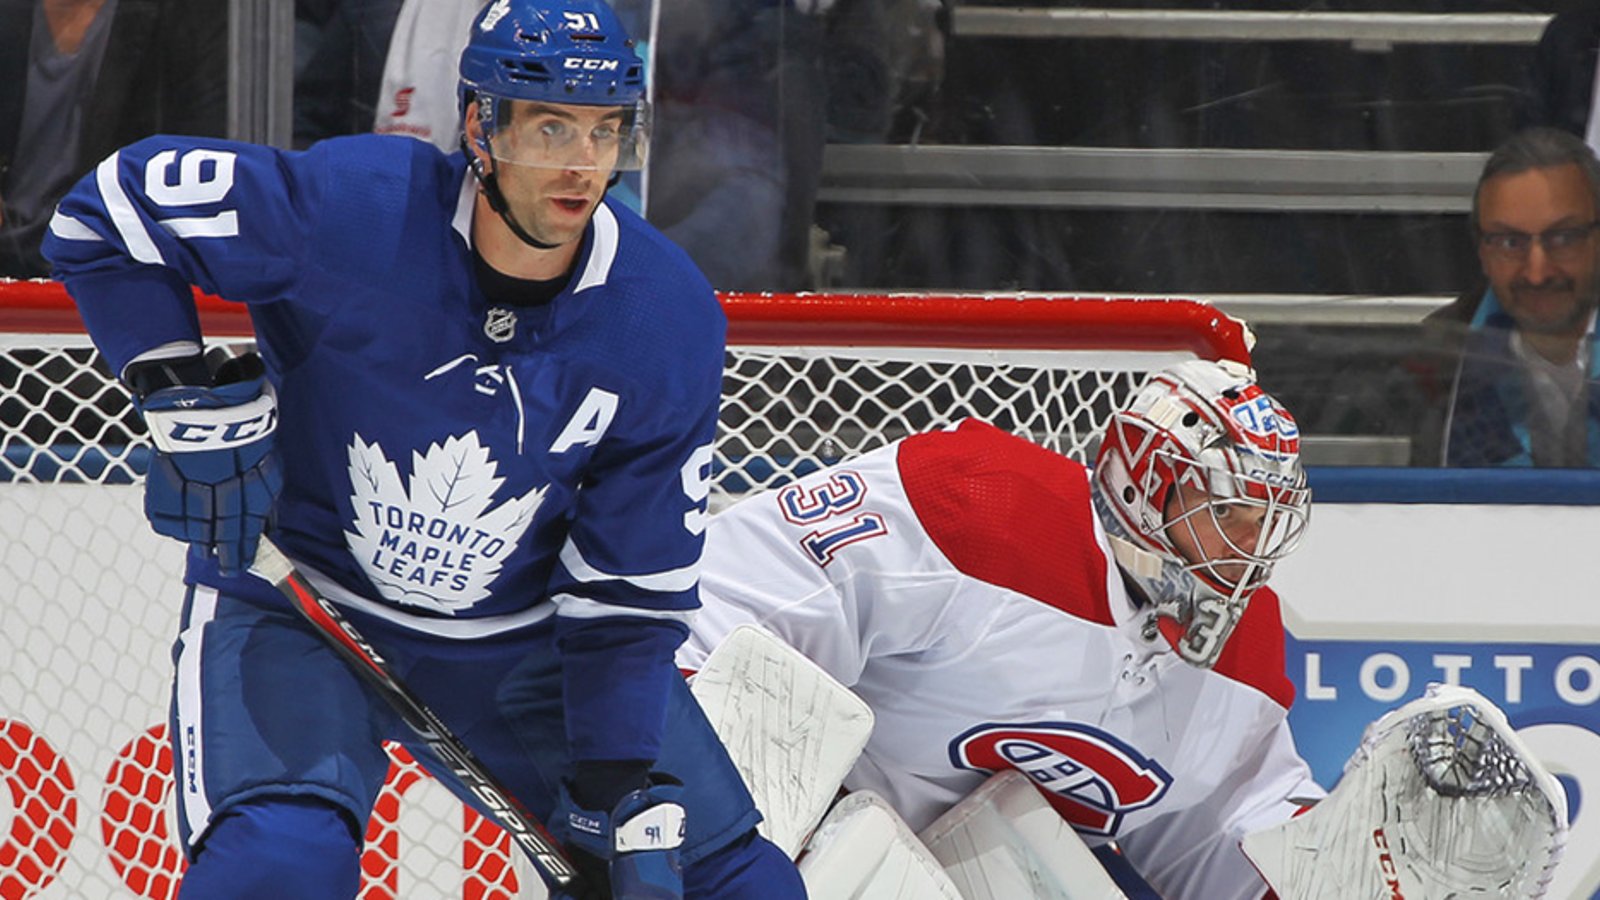 Maple Leafs players send messages of support to Canadiens G Carey Price